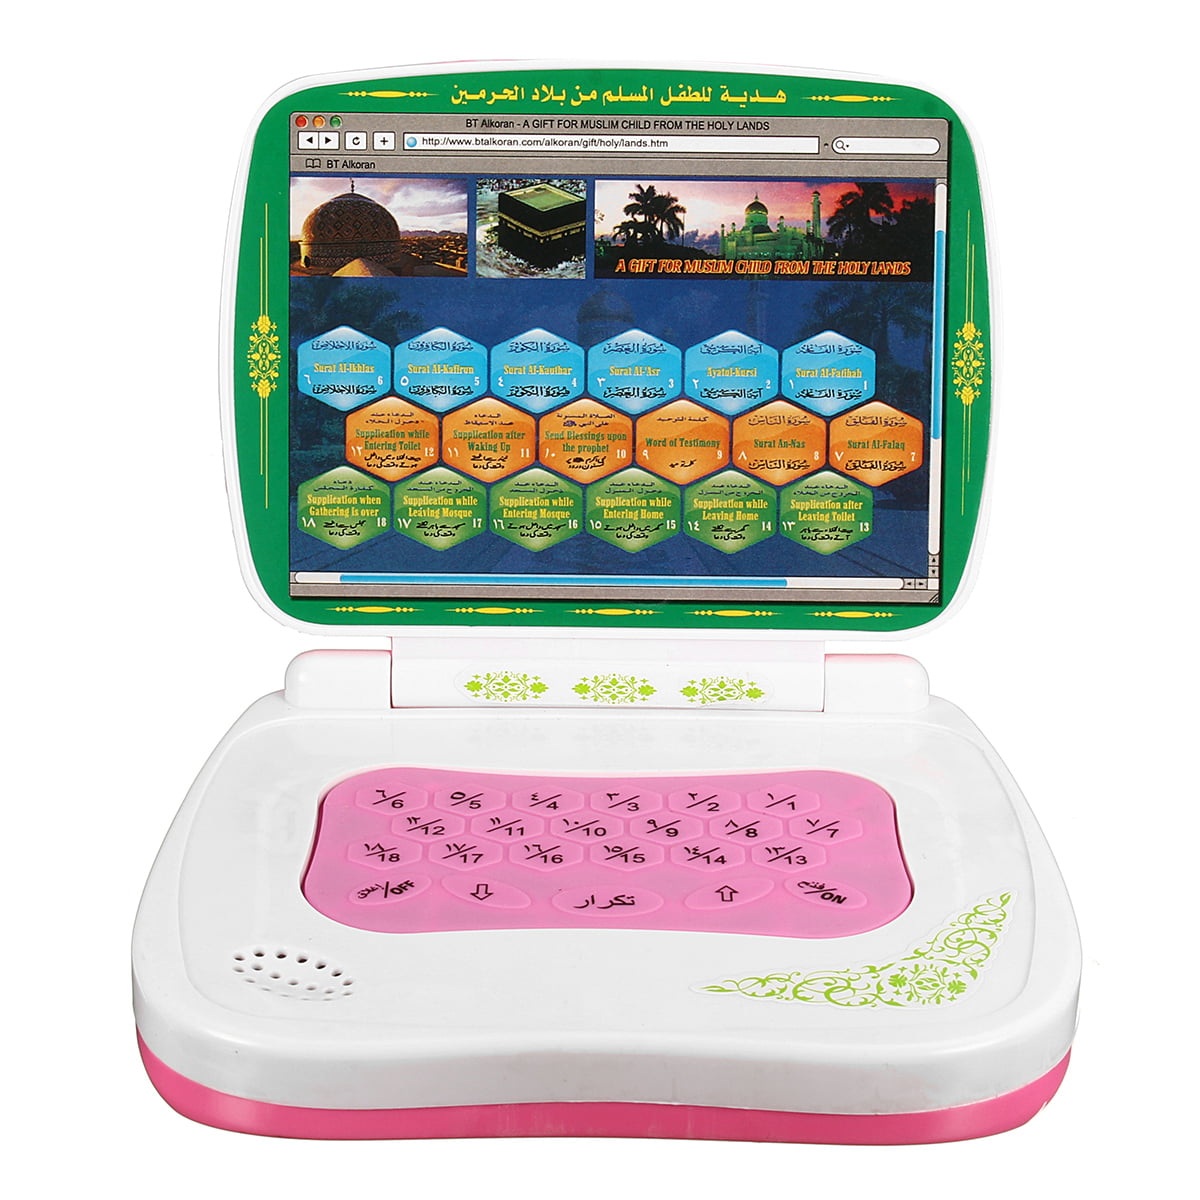 Details about   114 Chapters Quran Muslim Learning Machine Children Kid ToyBatteries Operated 